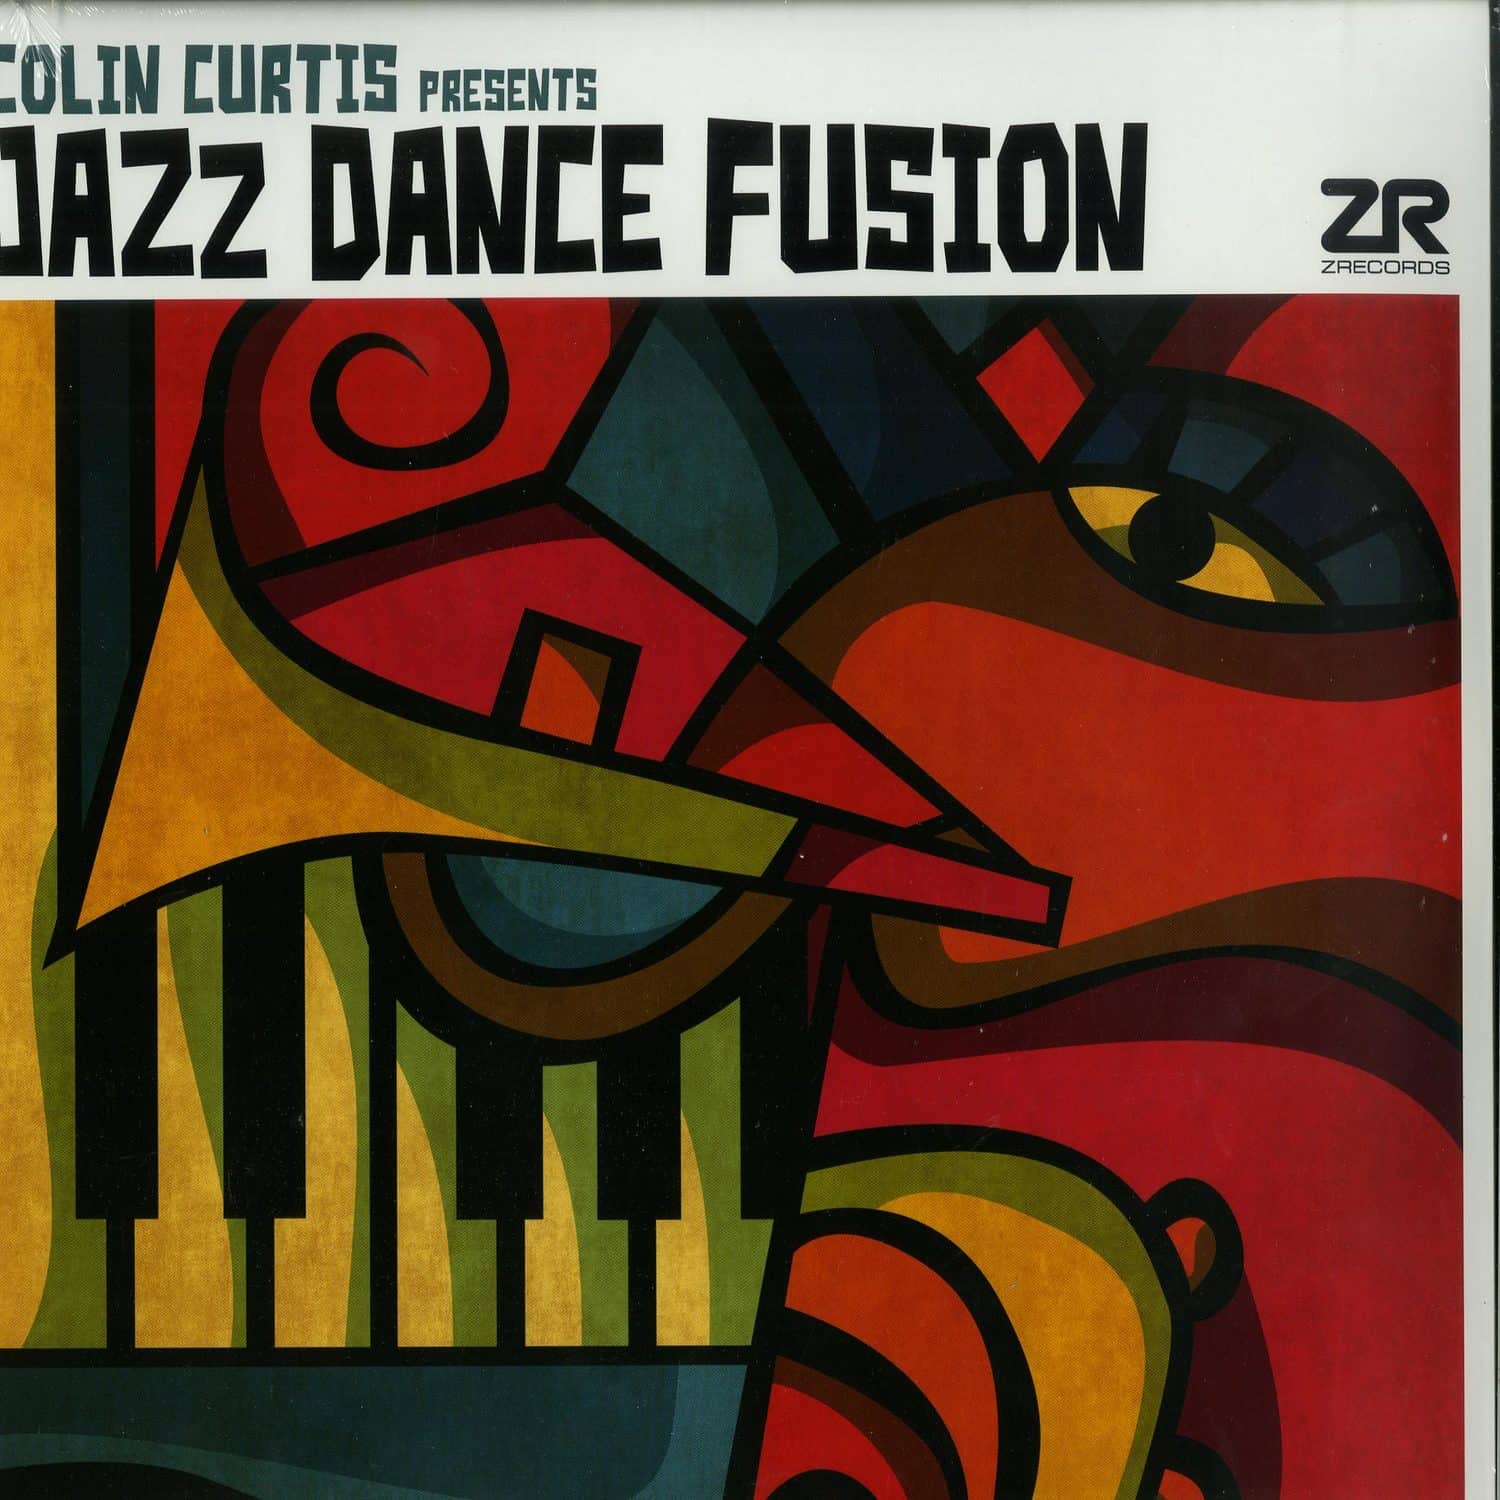 Various Artists - COLIN CURTIS PRESENTS JAZZ DANCE FUSION 